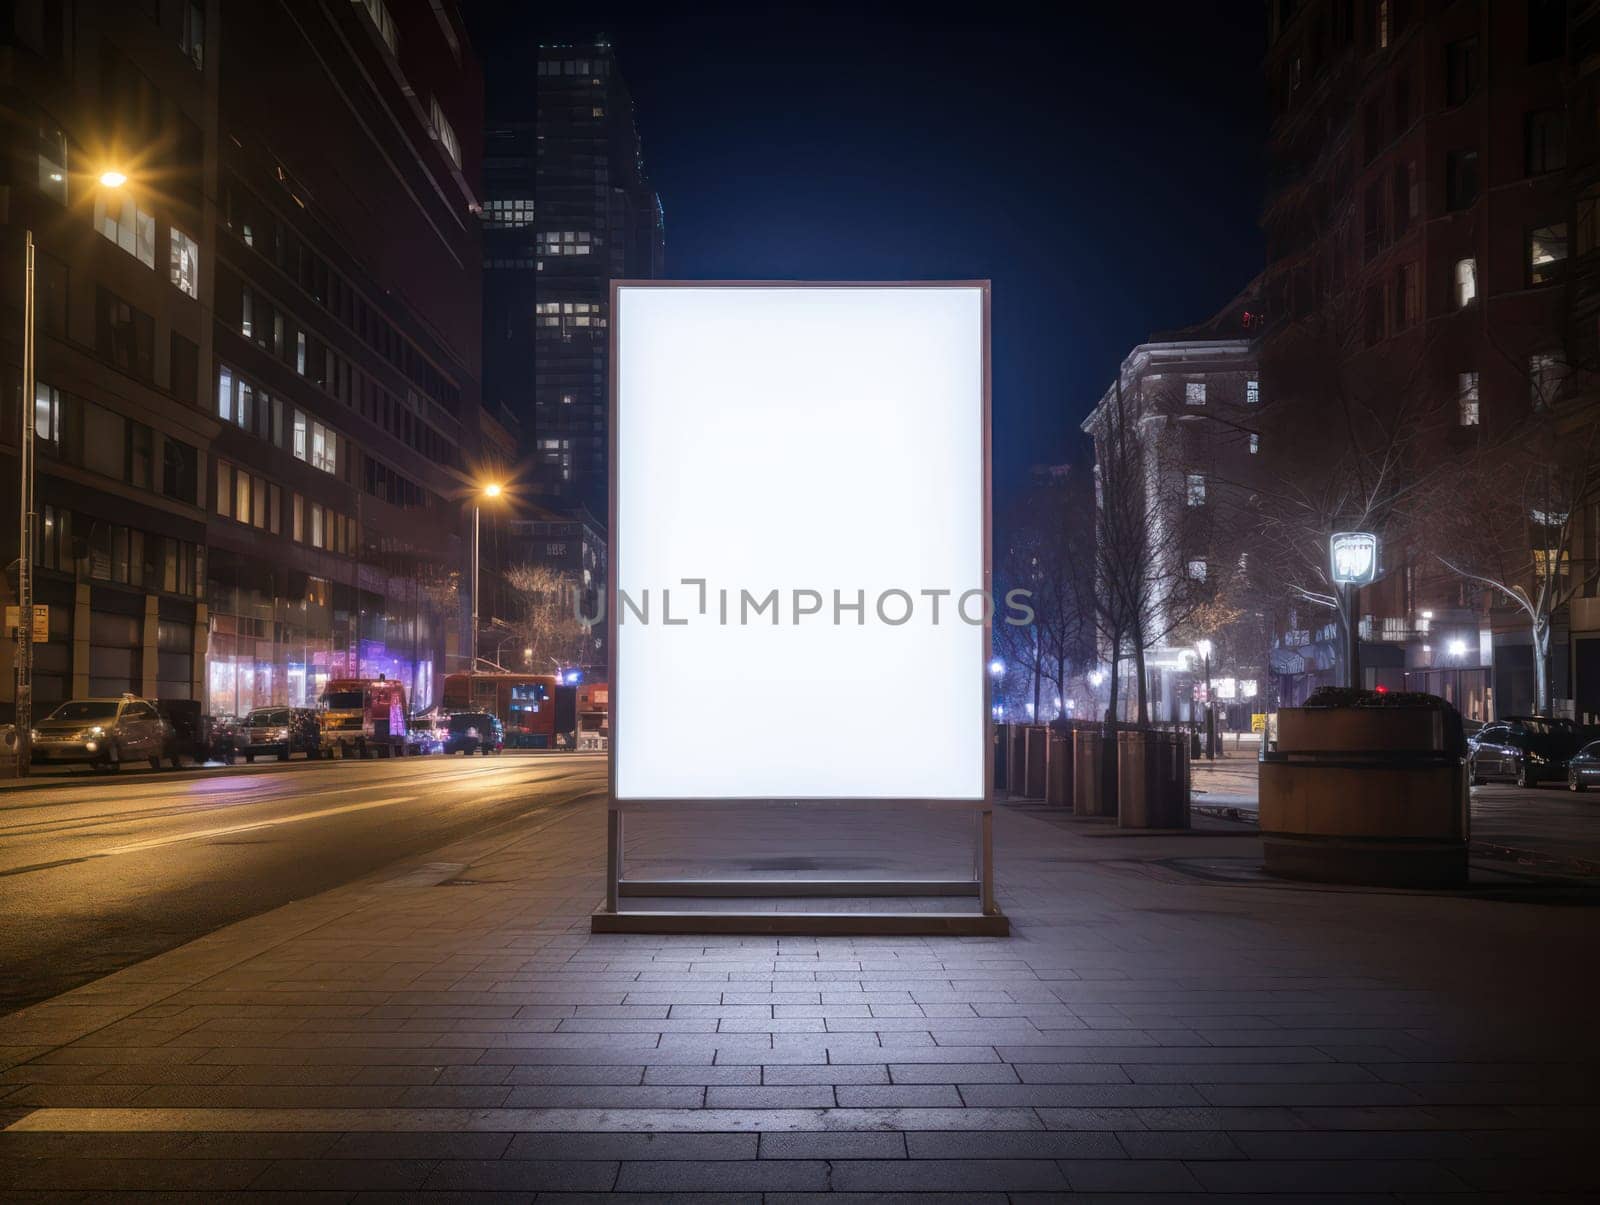 Urban Blank Billboard Advertise Space with Empty White Poster Mockup on City Street